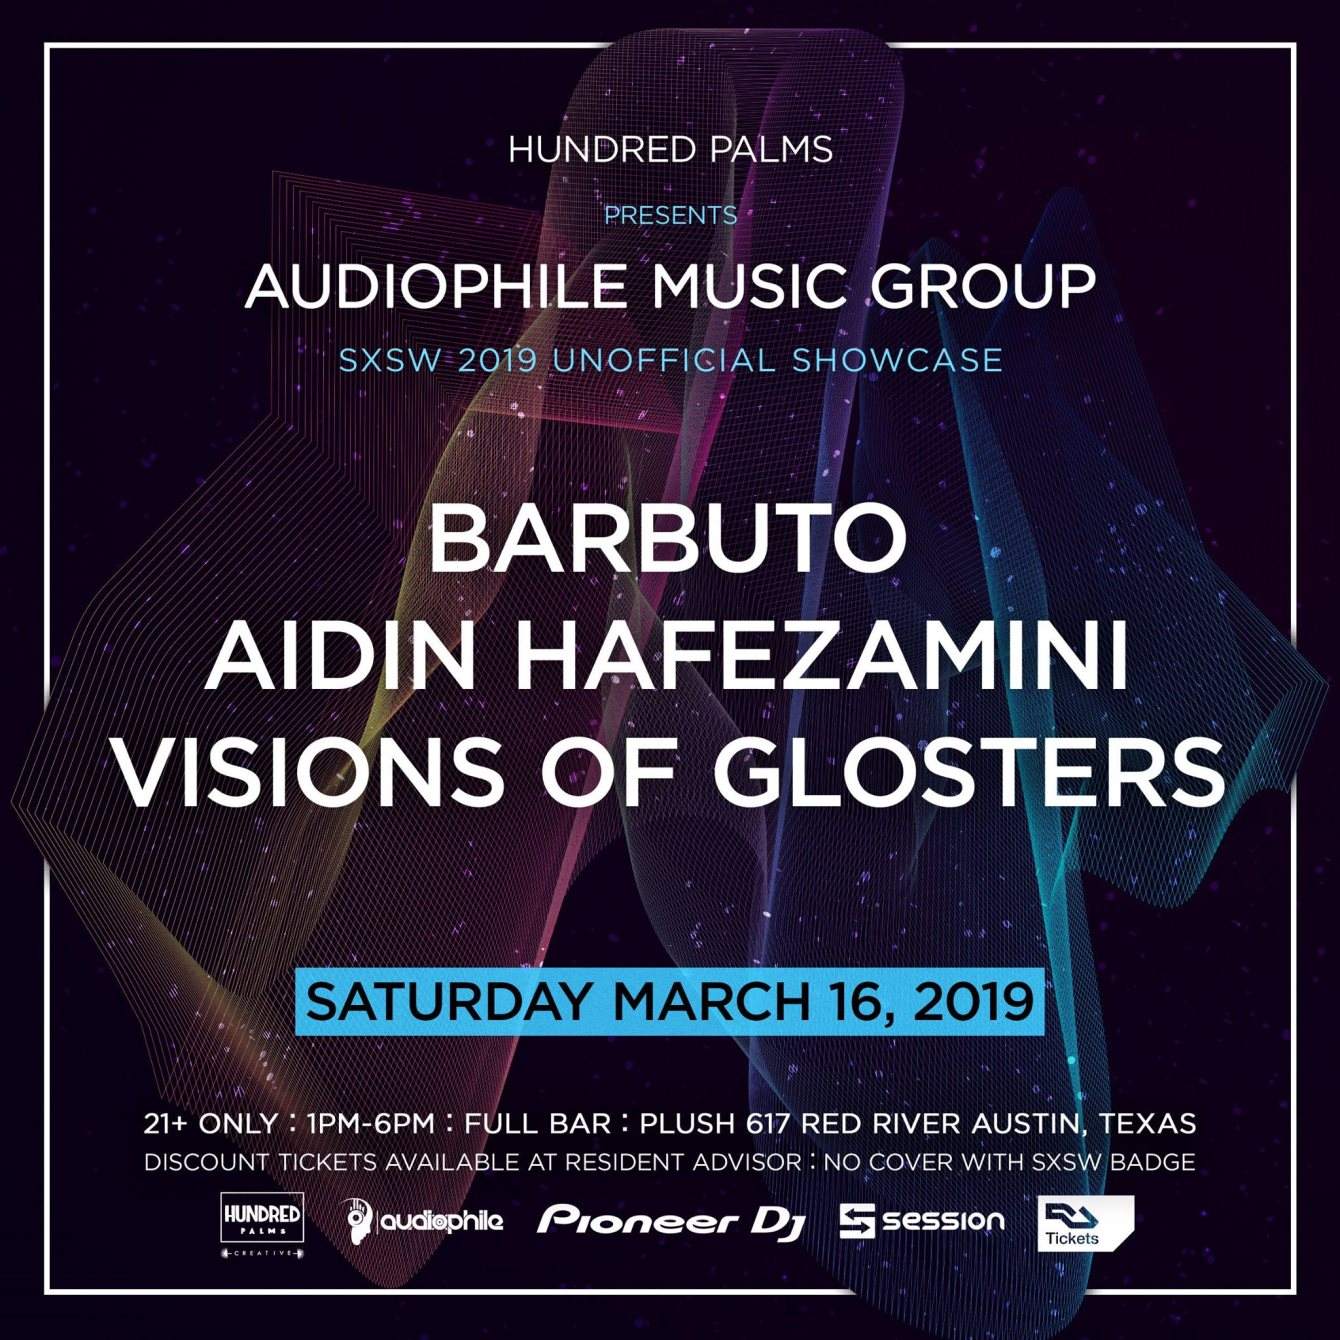 Hundred Palms presents: Audiophile Music Group Sxsw 2019 Unofficial Showcase - Página frontal